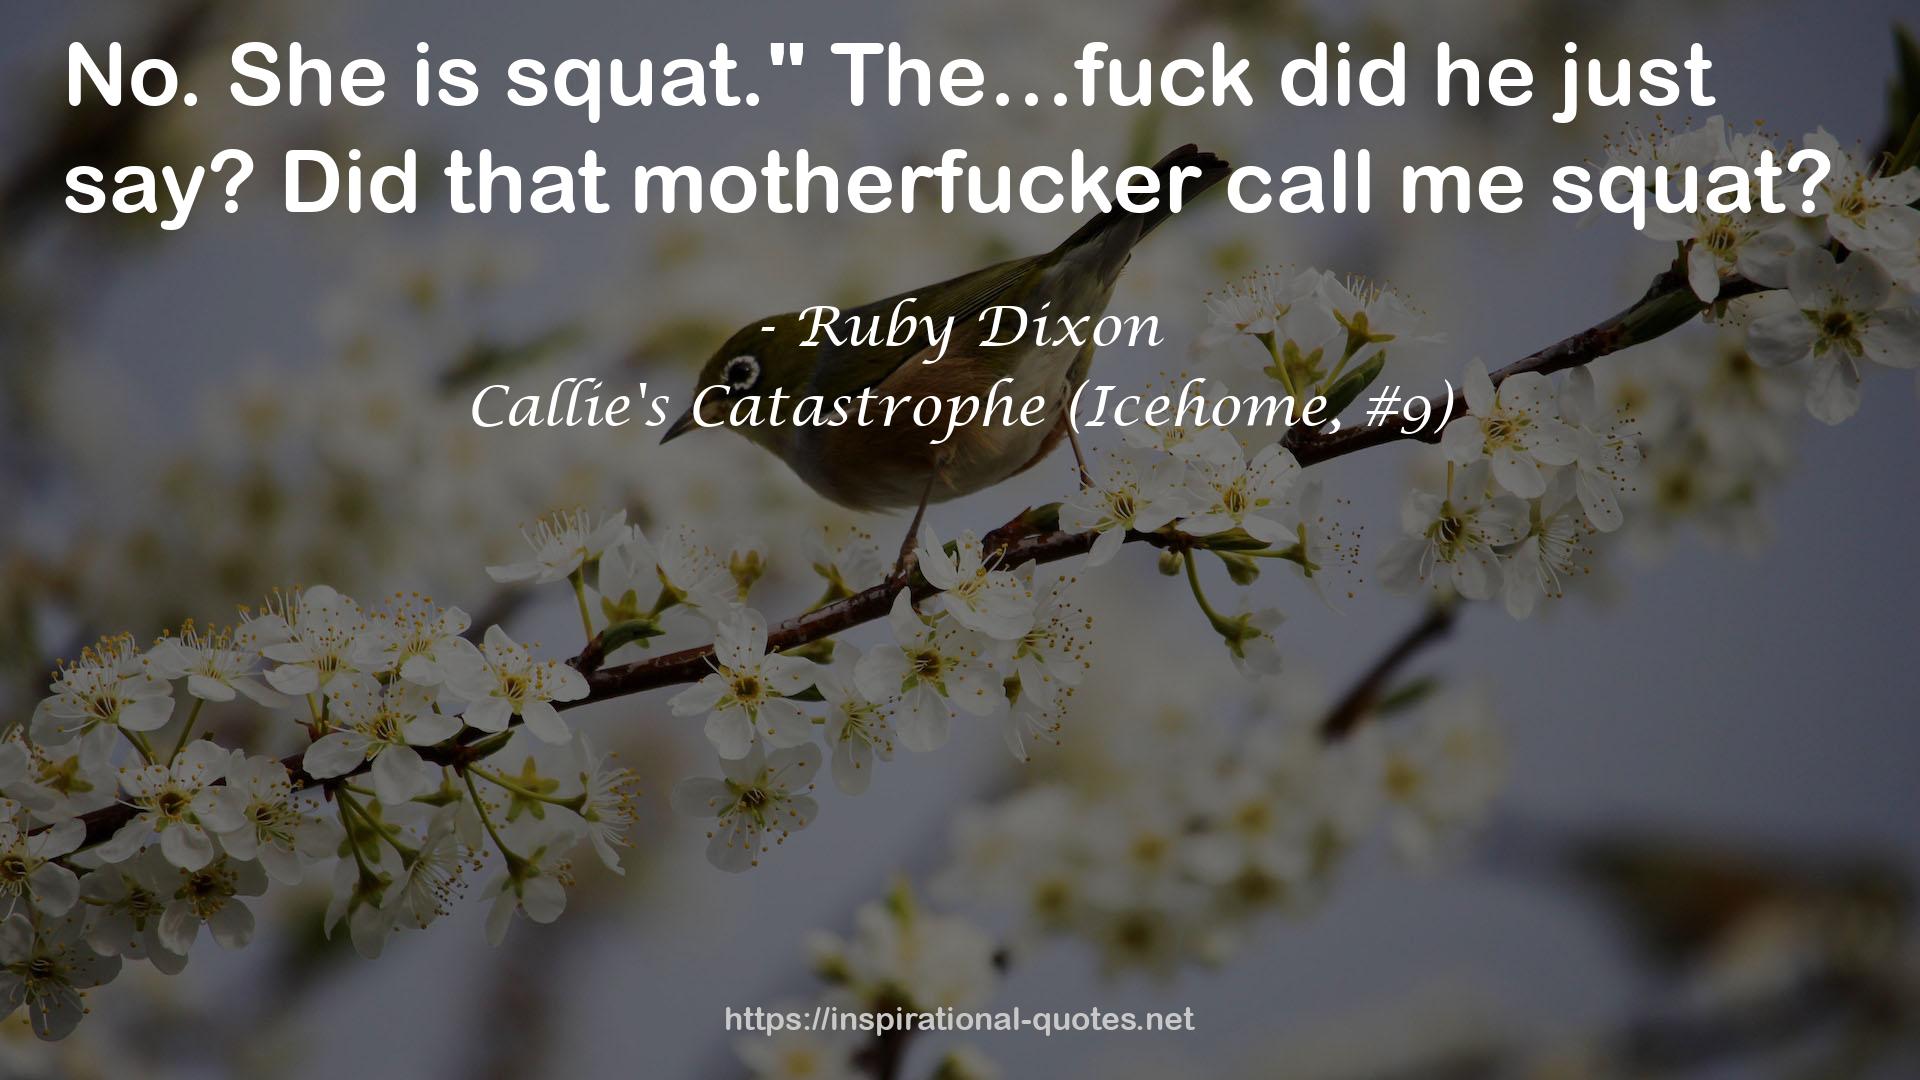 Callie's Catastrophe (Icehome, #9) QUOTES